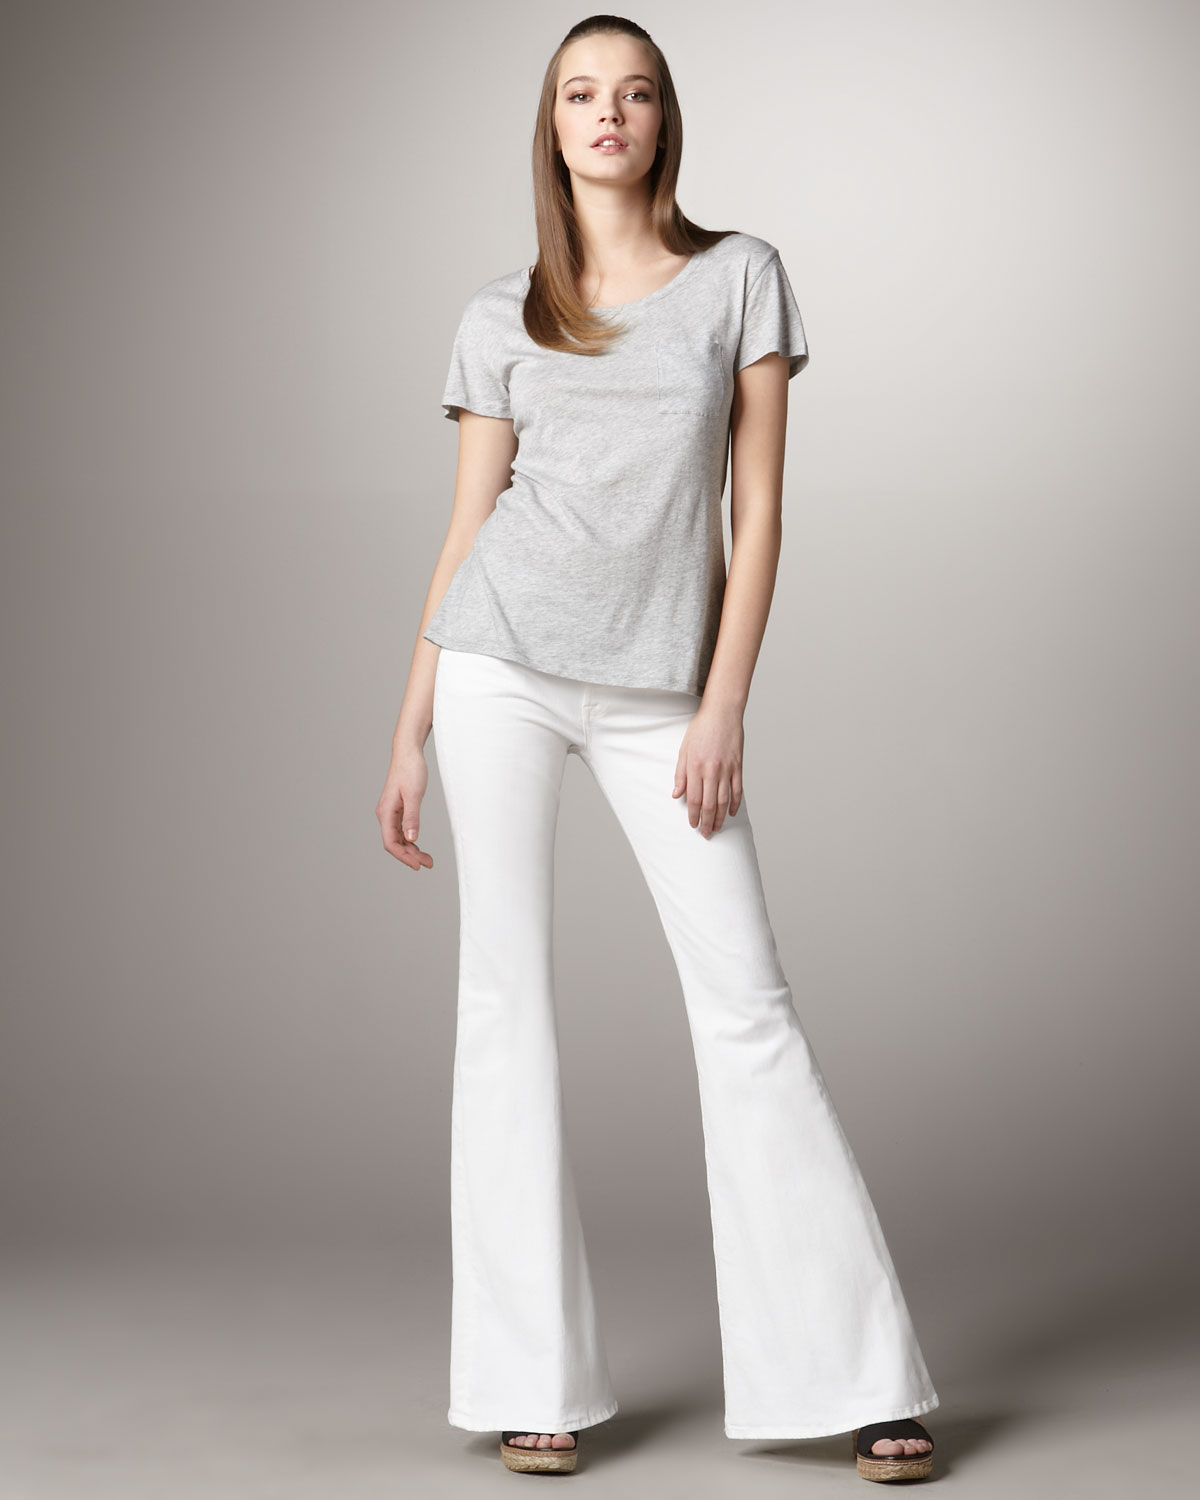 Lyst - 7 For All Mankind Bell Bottom Clean White Jeans in White